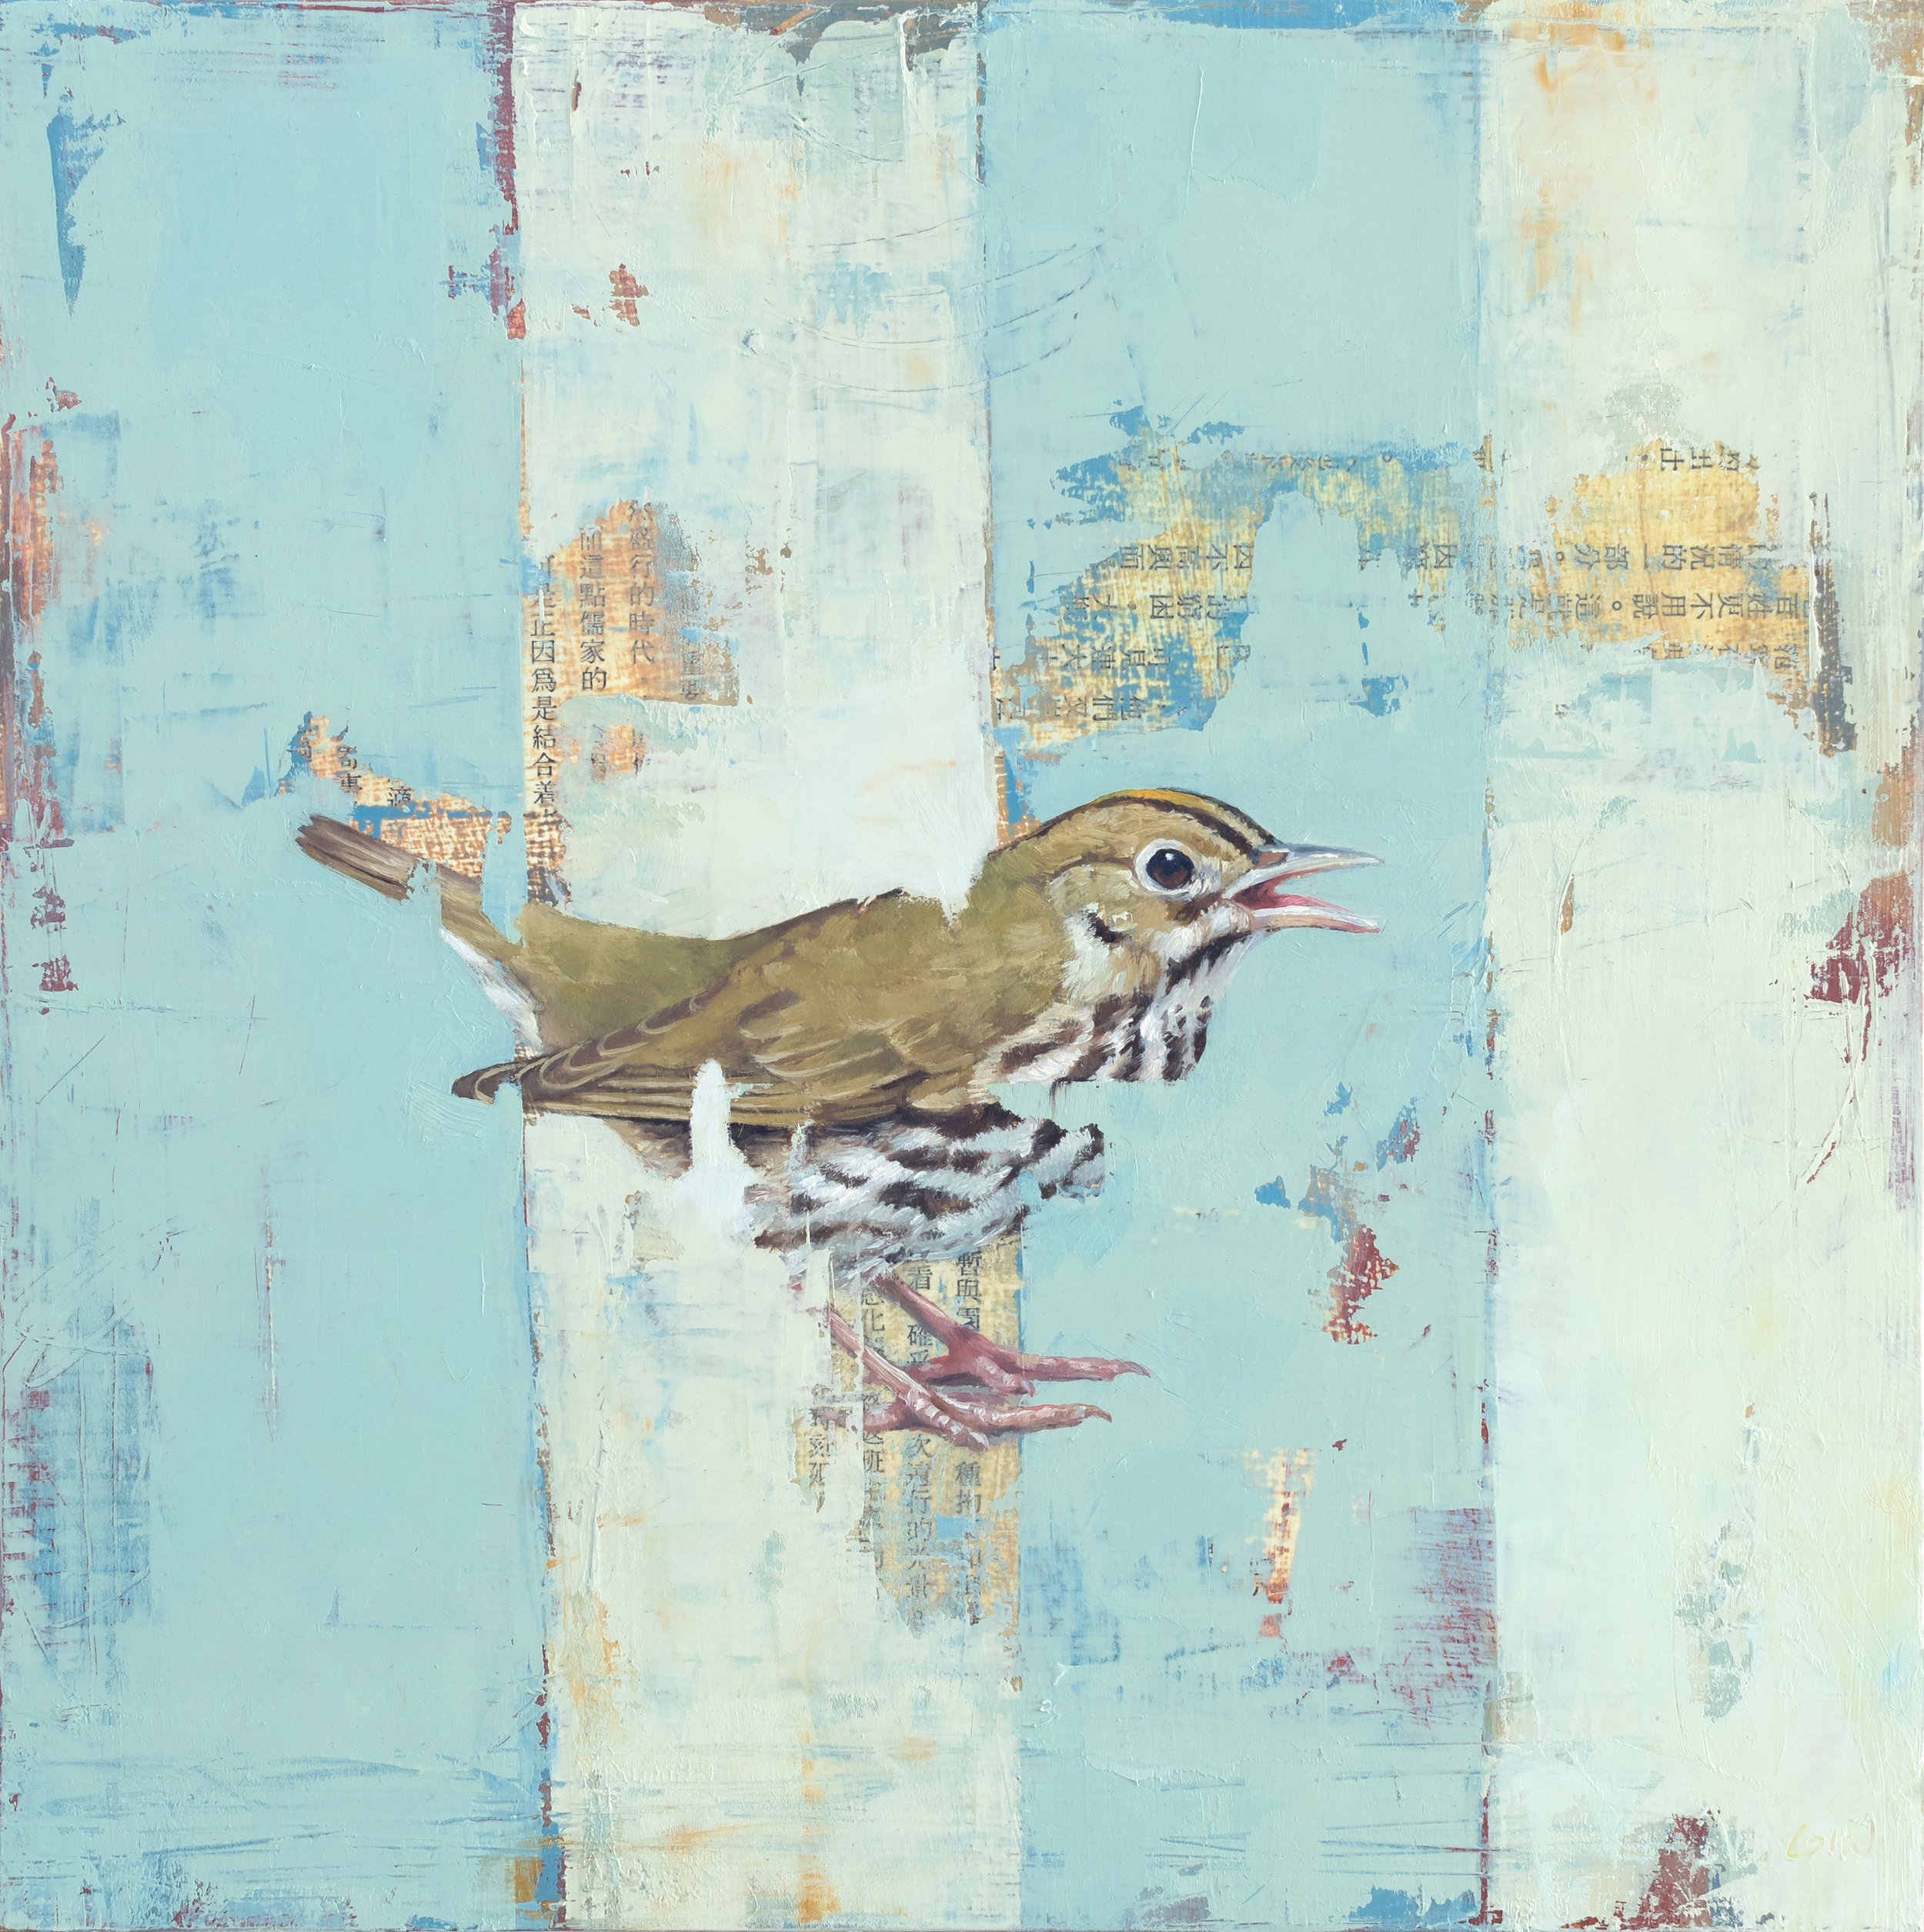   Ovenbird  2019 oil and collage on panel 10 x 10 inches  Private Collection 